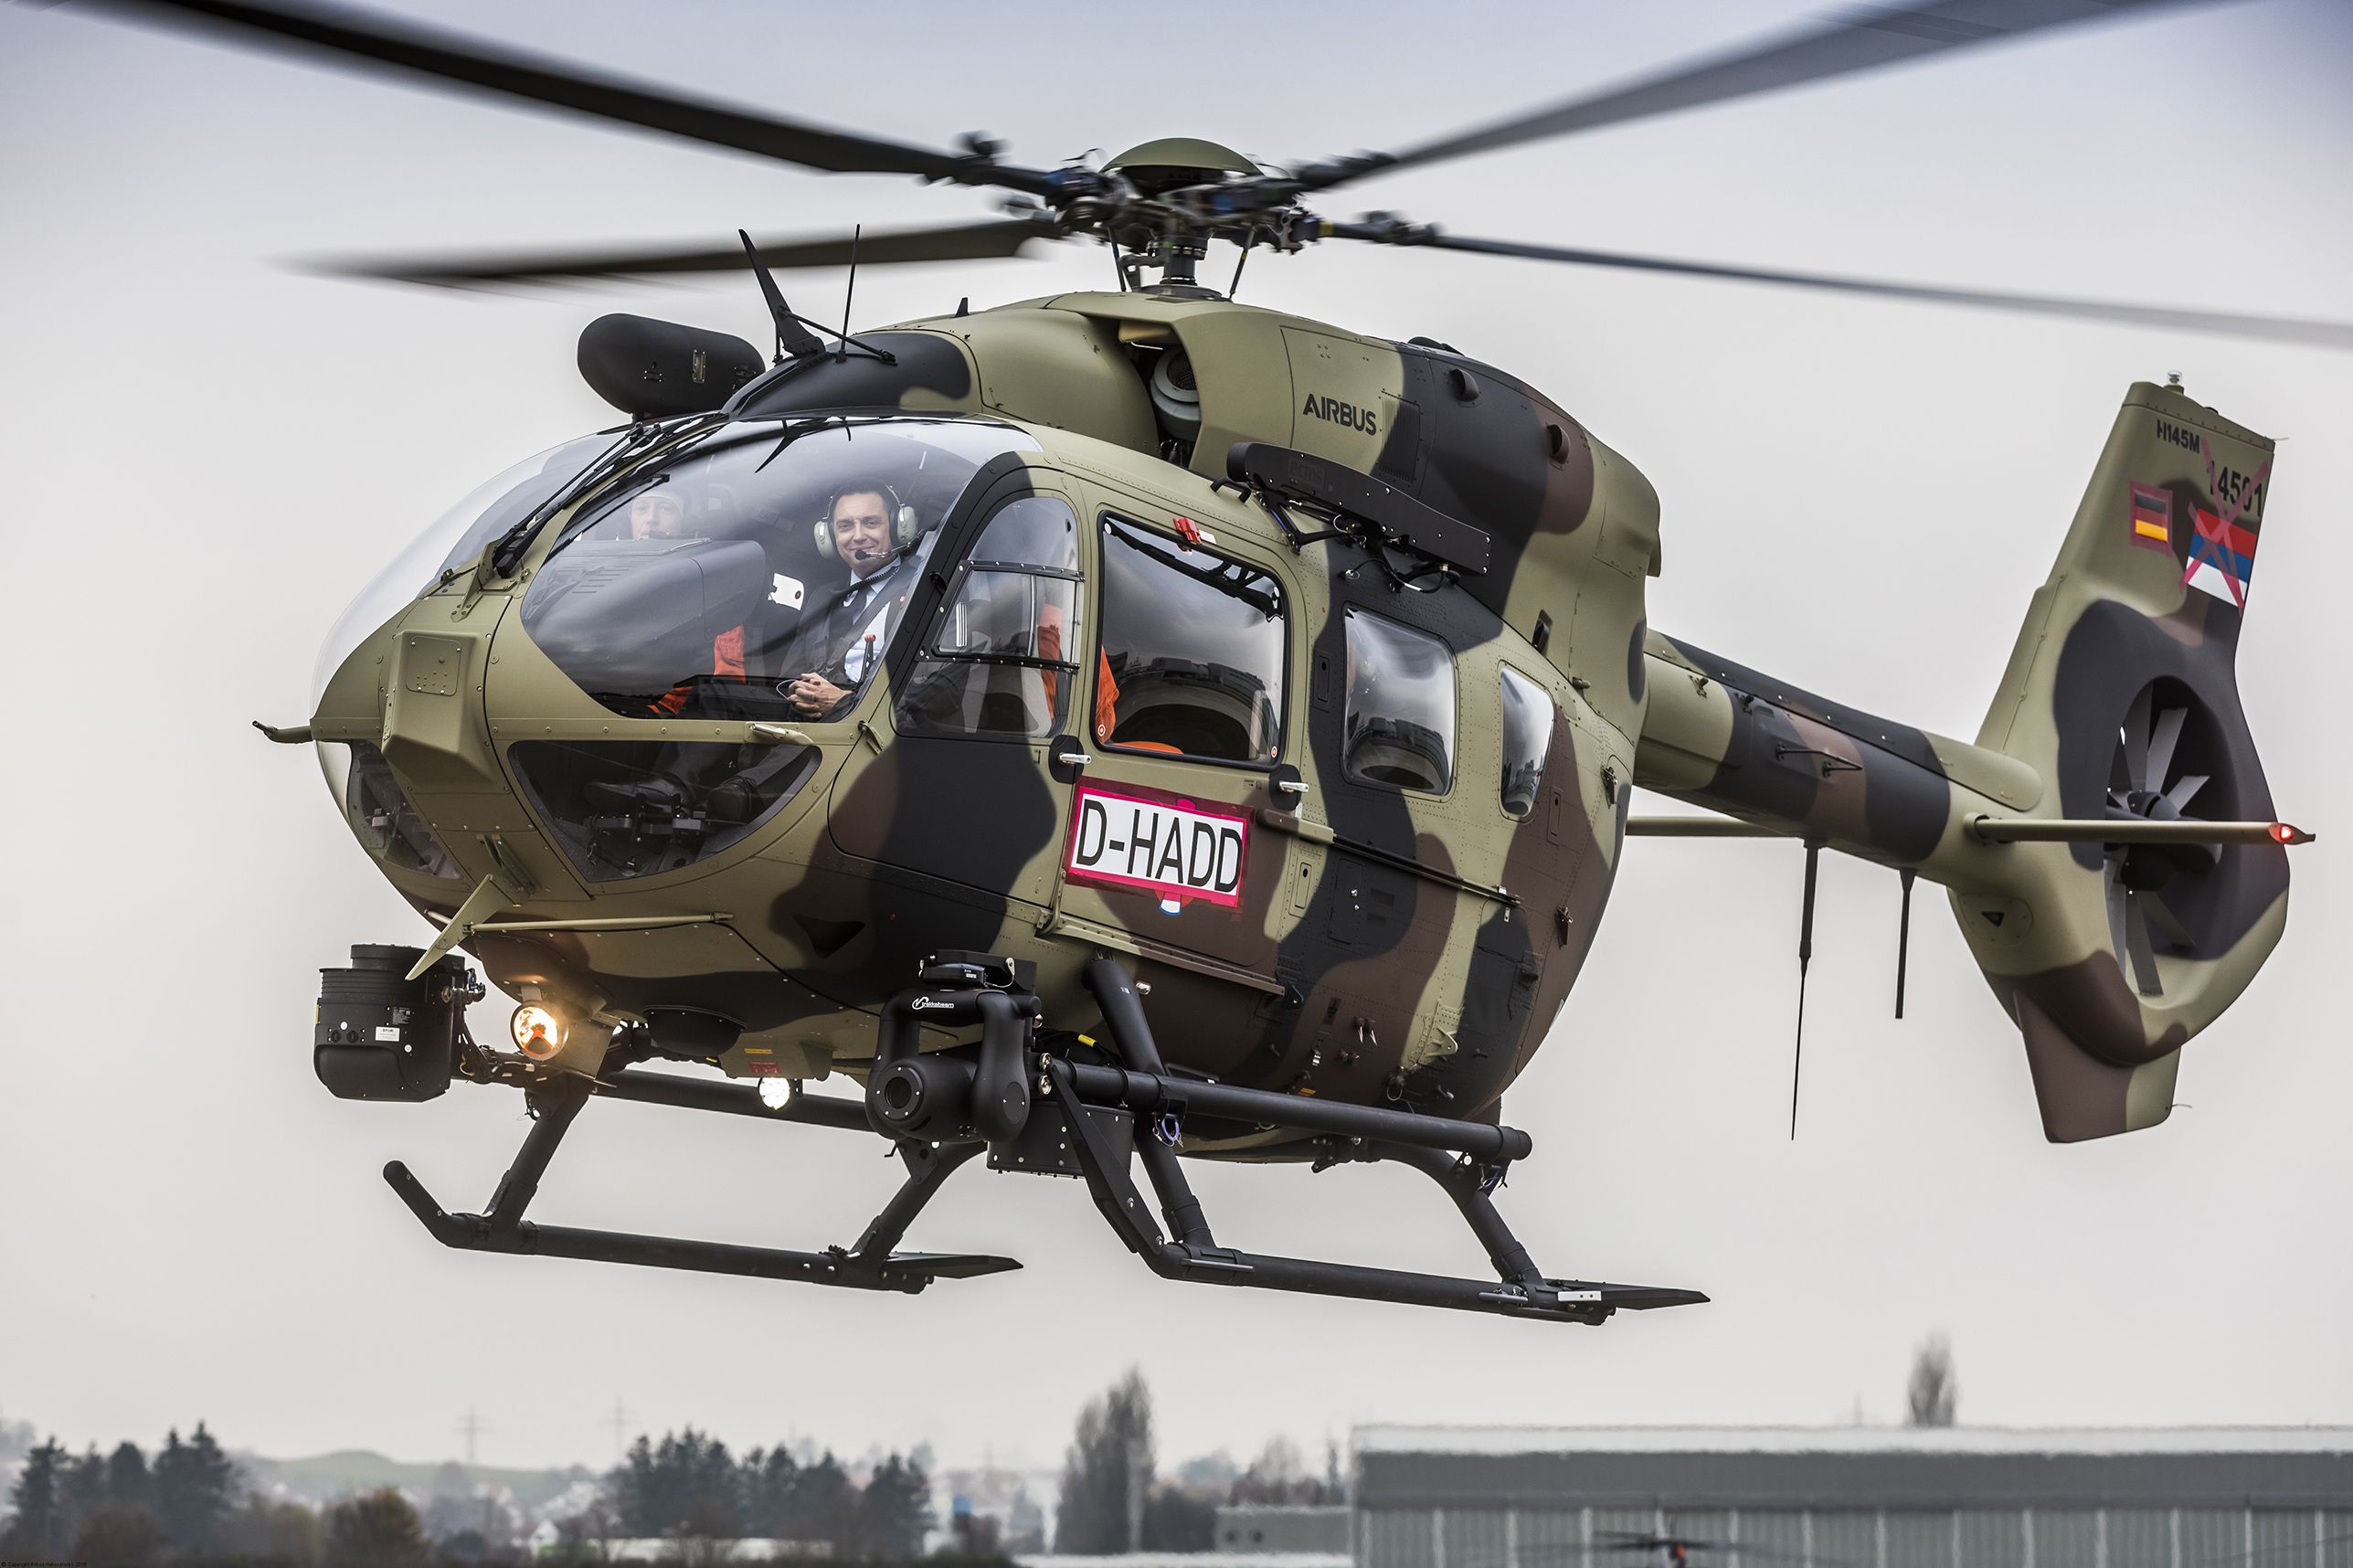 Serbian Air Force first of nine H145Ms